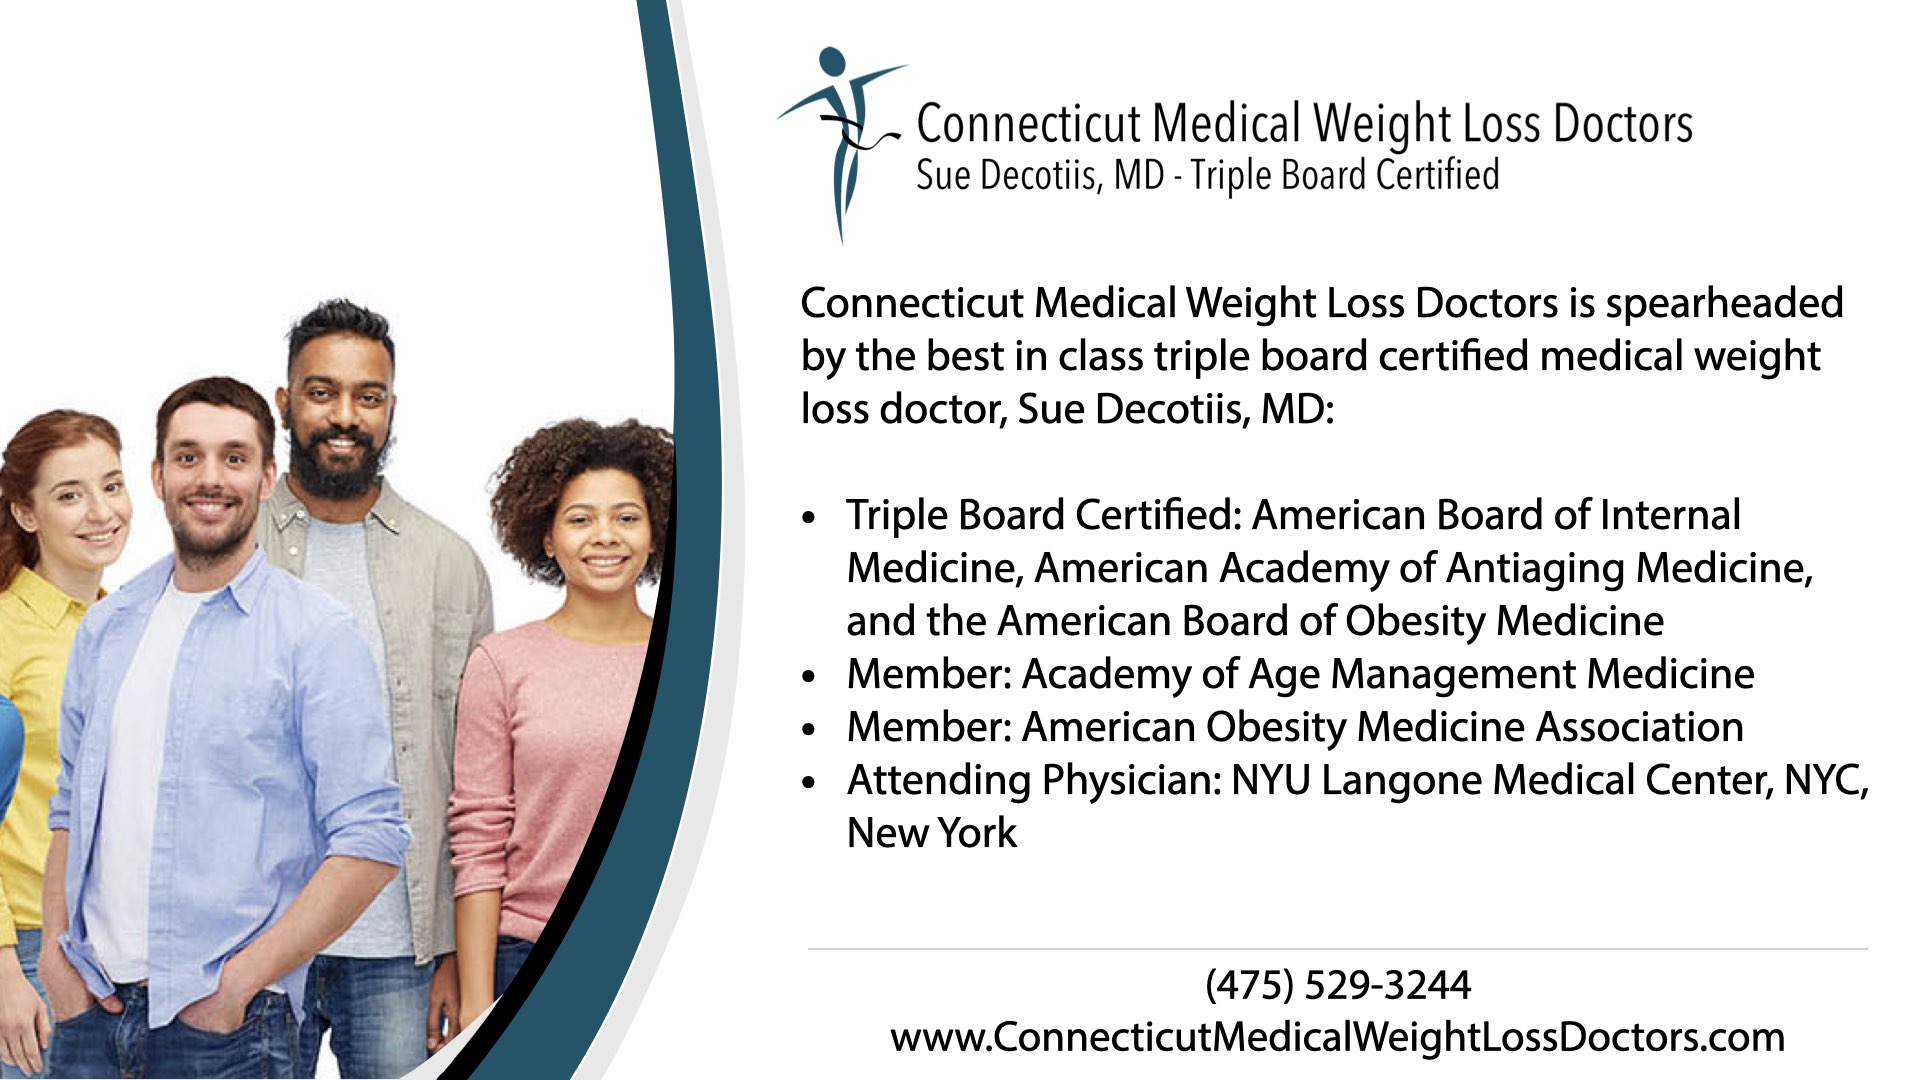 Connecticut Medical Weight Loss Doctors - Credentials and Memberships